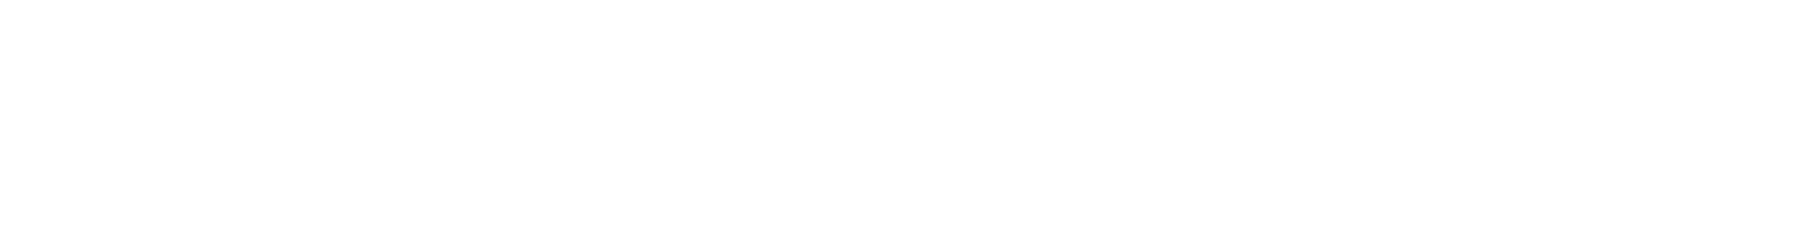 Lexus Logo Hd Png Meaning Information